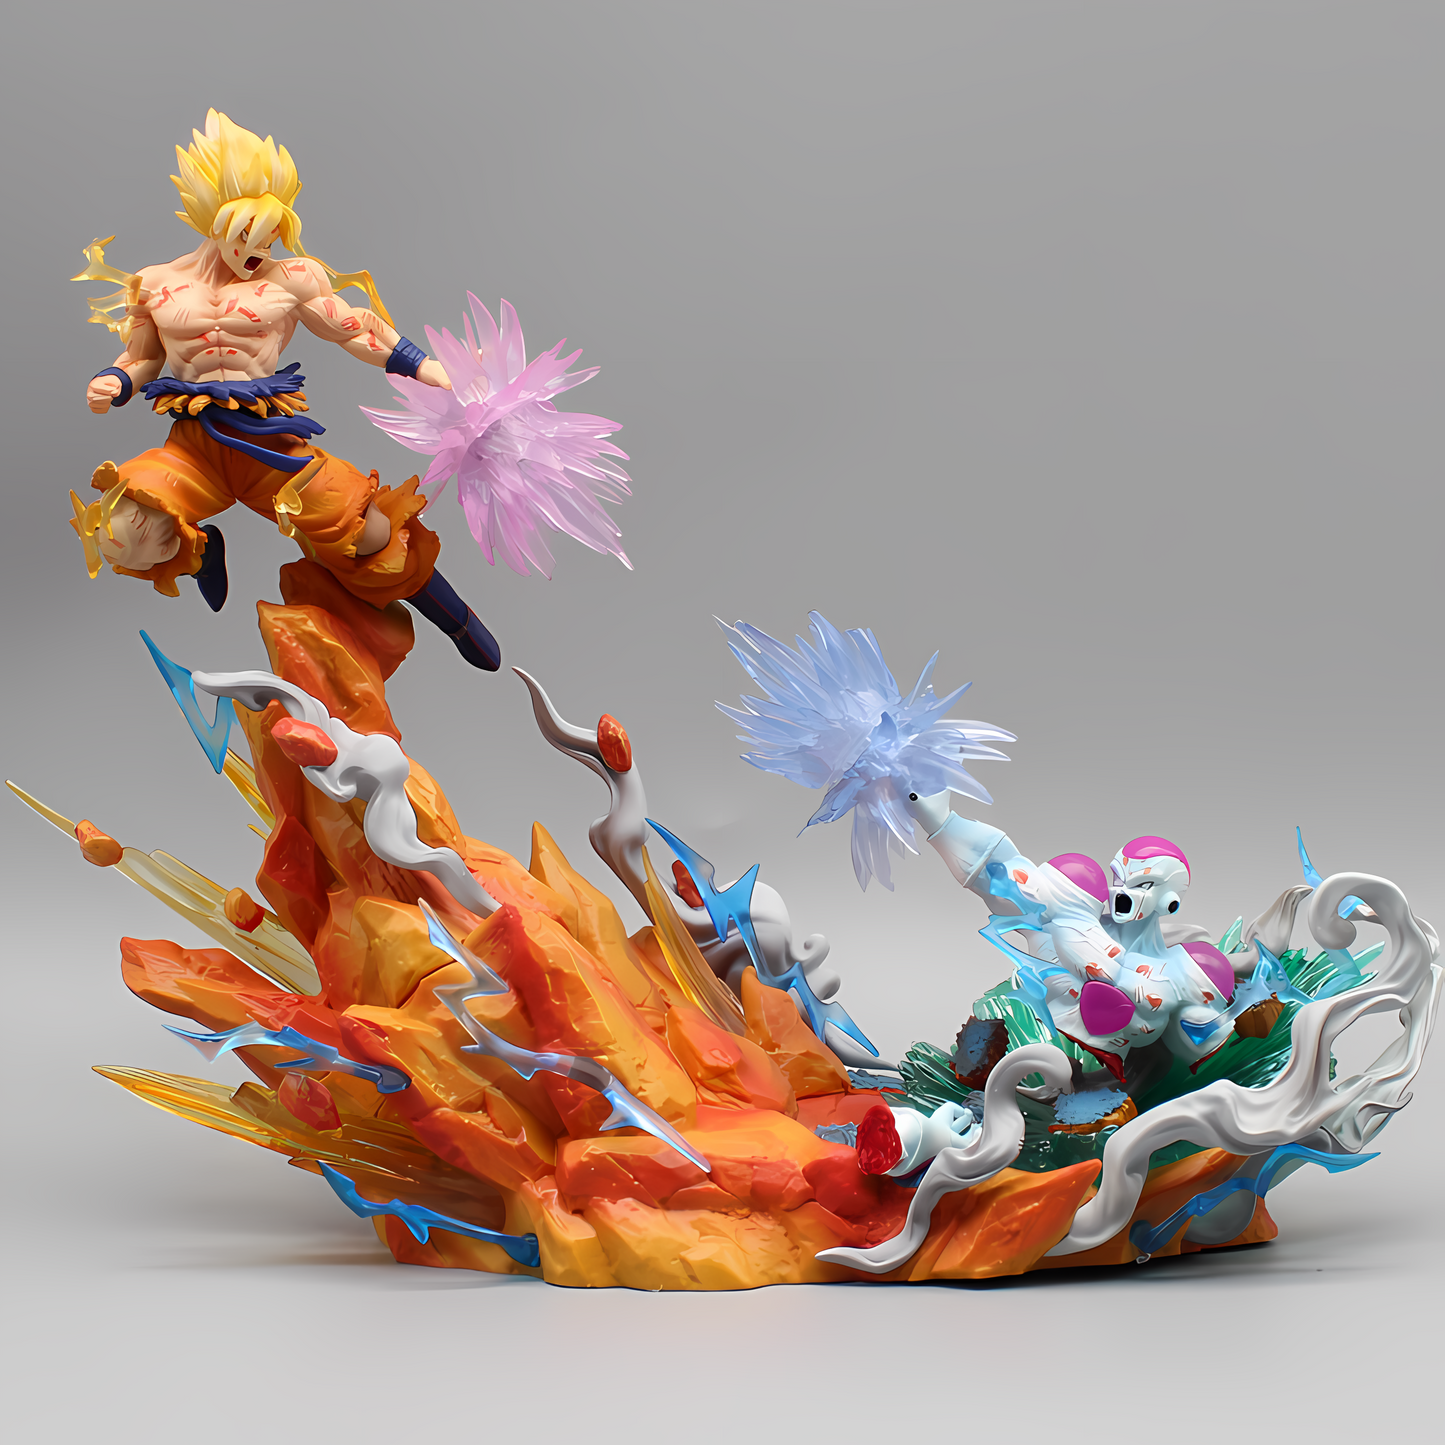 The Dragon Ball collectible 'Clash of Titans Goku vs. Frieza' captures an iconic battle with Goku in Super Saiyan form, poised for combat above a fiery orange and red eruption, while Frieza unleashes an icy blue attack below. This detailed figurine highlights the fierce energy and motion of the fight, set against a neutral background to draw attention to the vibrant action.